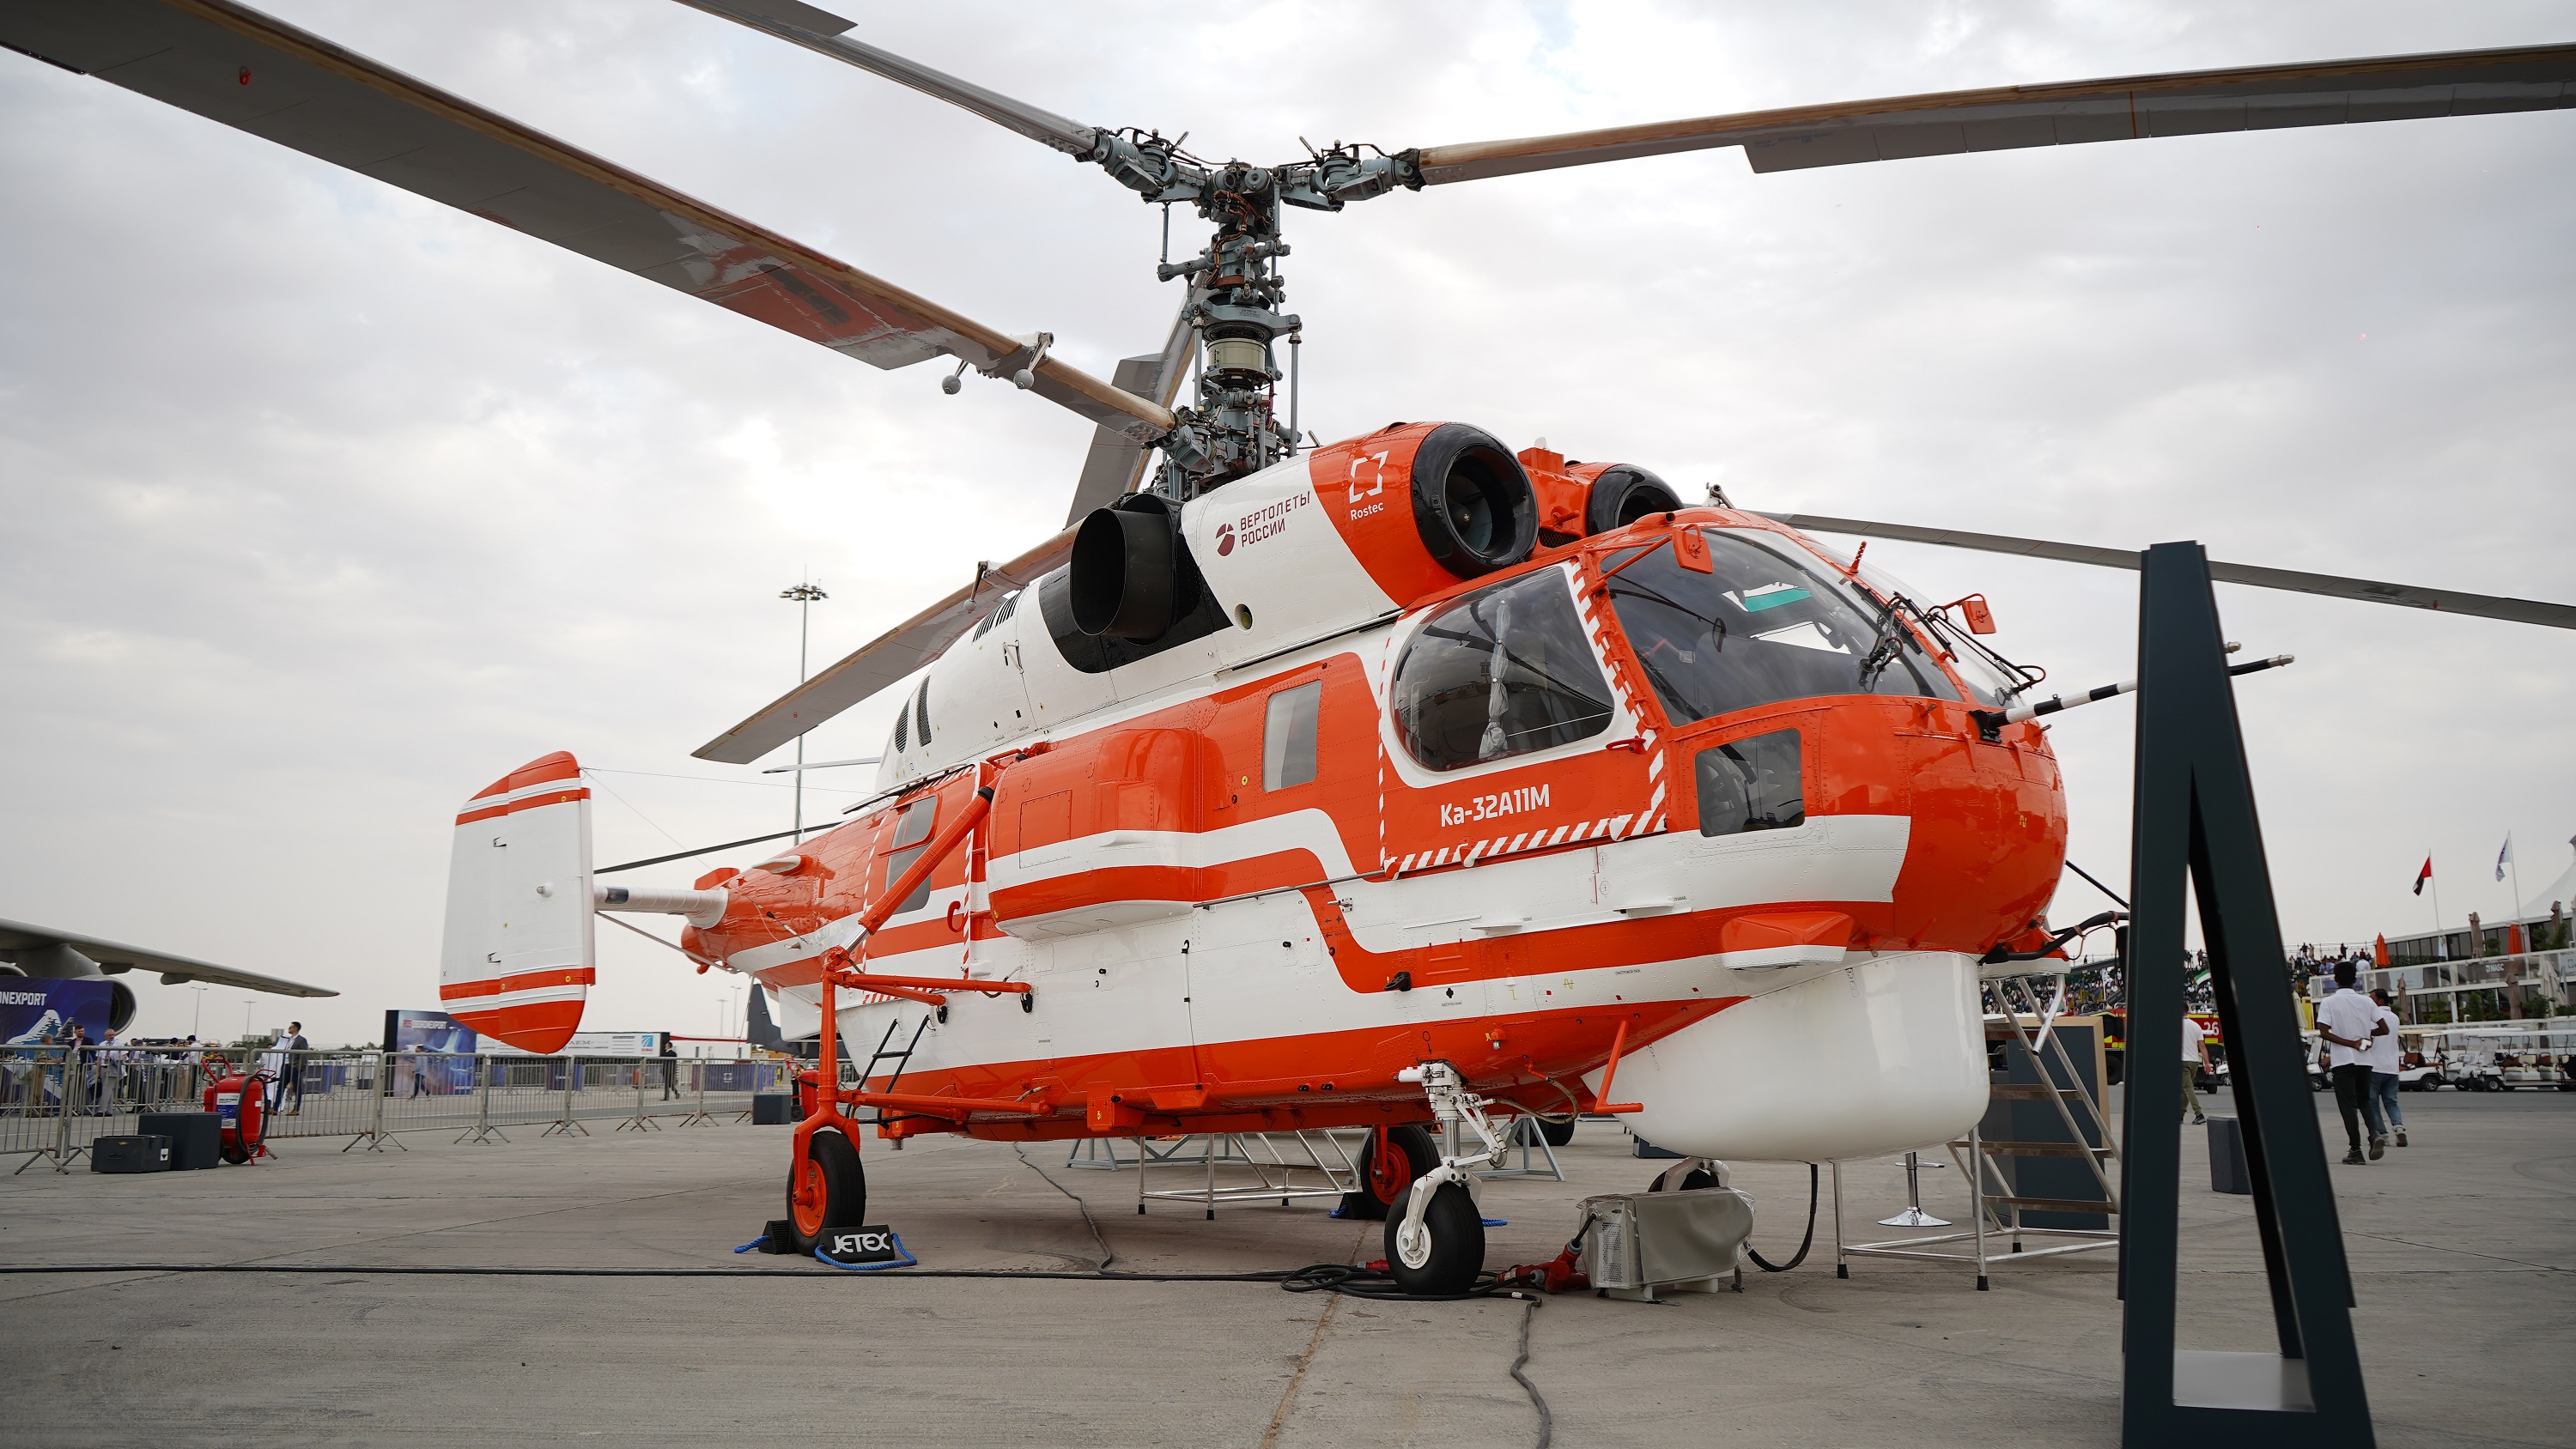 The latest Ka-32A11M Fire Helicopter has had its First International Appearance